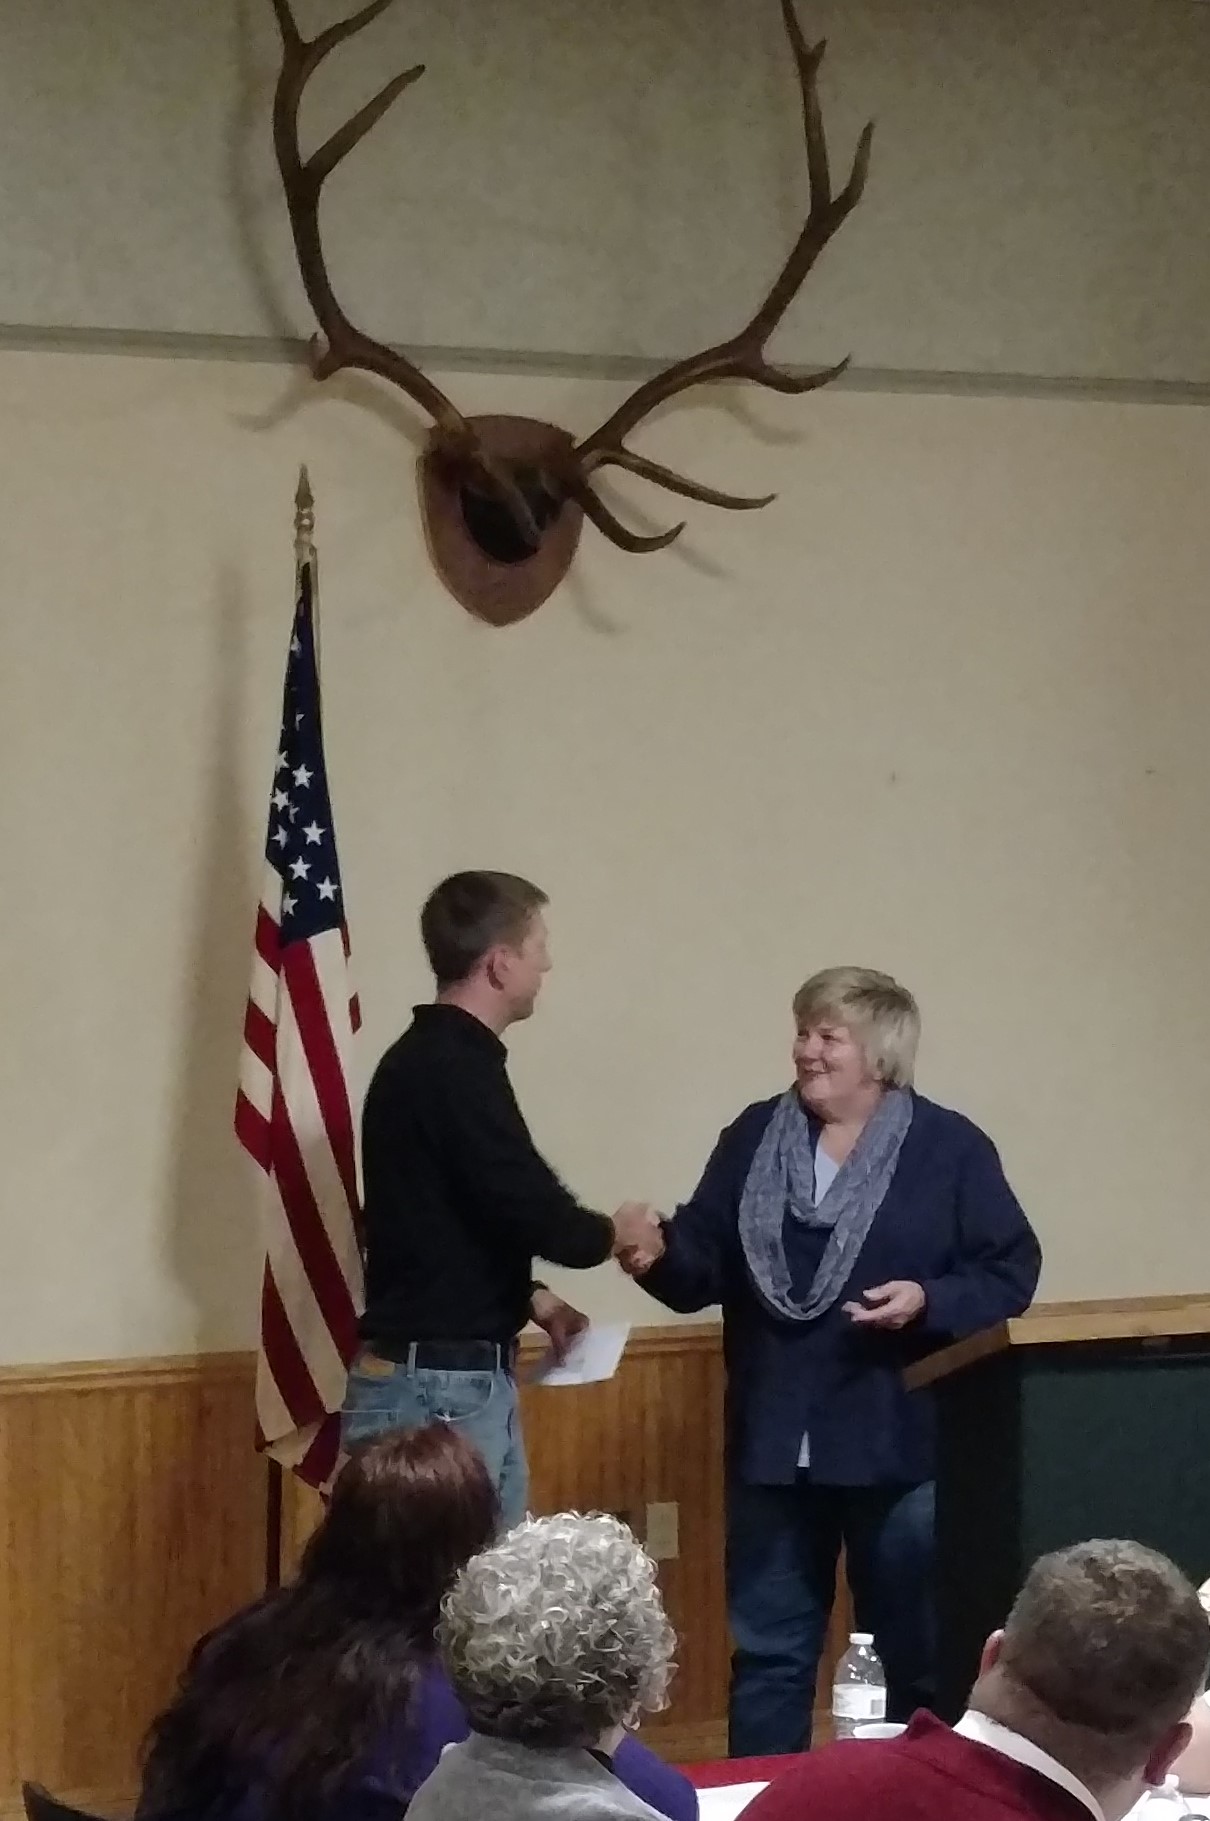 Bev Lawhead, Past Exhalted Ruler left, presents a donation to Jim Mc Corkle, Parker dam and S.B. Elliot state park manager at Tuesday's annual donation dinner at the Benevolent and Protective Order of Elks, Clearfield Lodge #540. Since 1989, the Elks Past Exalted Rulers Association has hosted the High Country Arts and Crafts Fair. Money generated from the fair is then donated to local charities and civic organizations. This year, the Elks donated over $7,000 to organizations in Clearfield and the surrounding areas. (Photo Submitted)